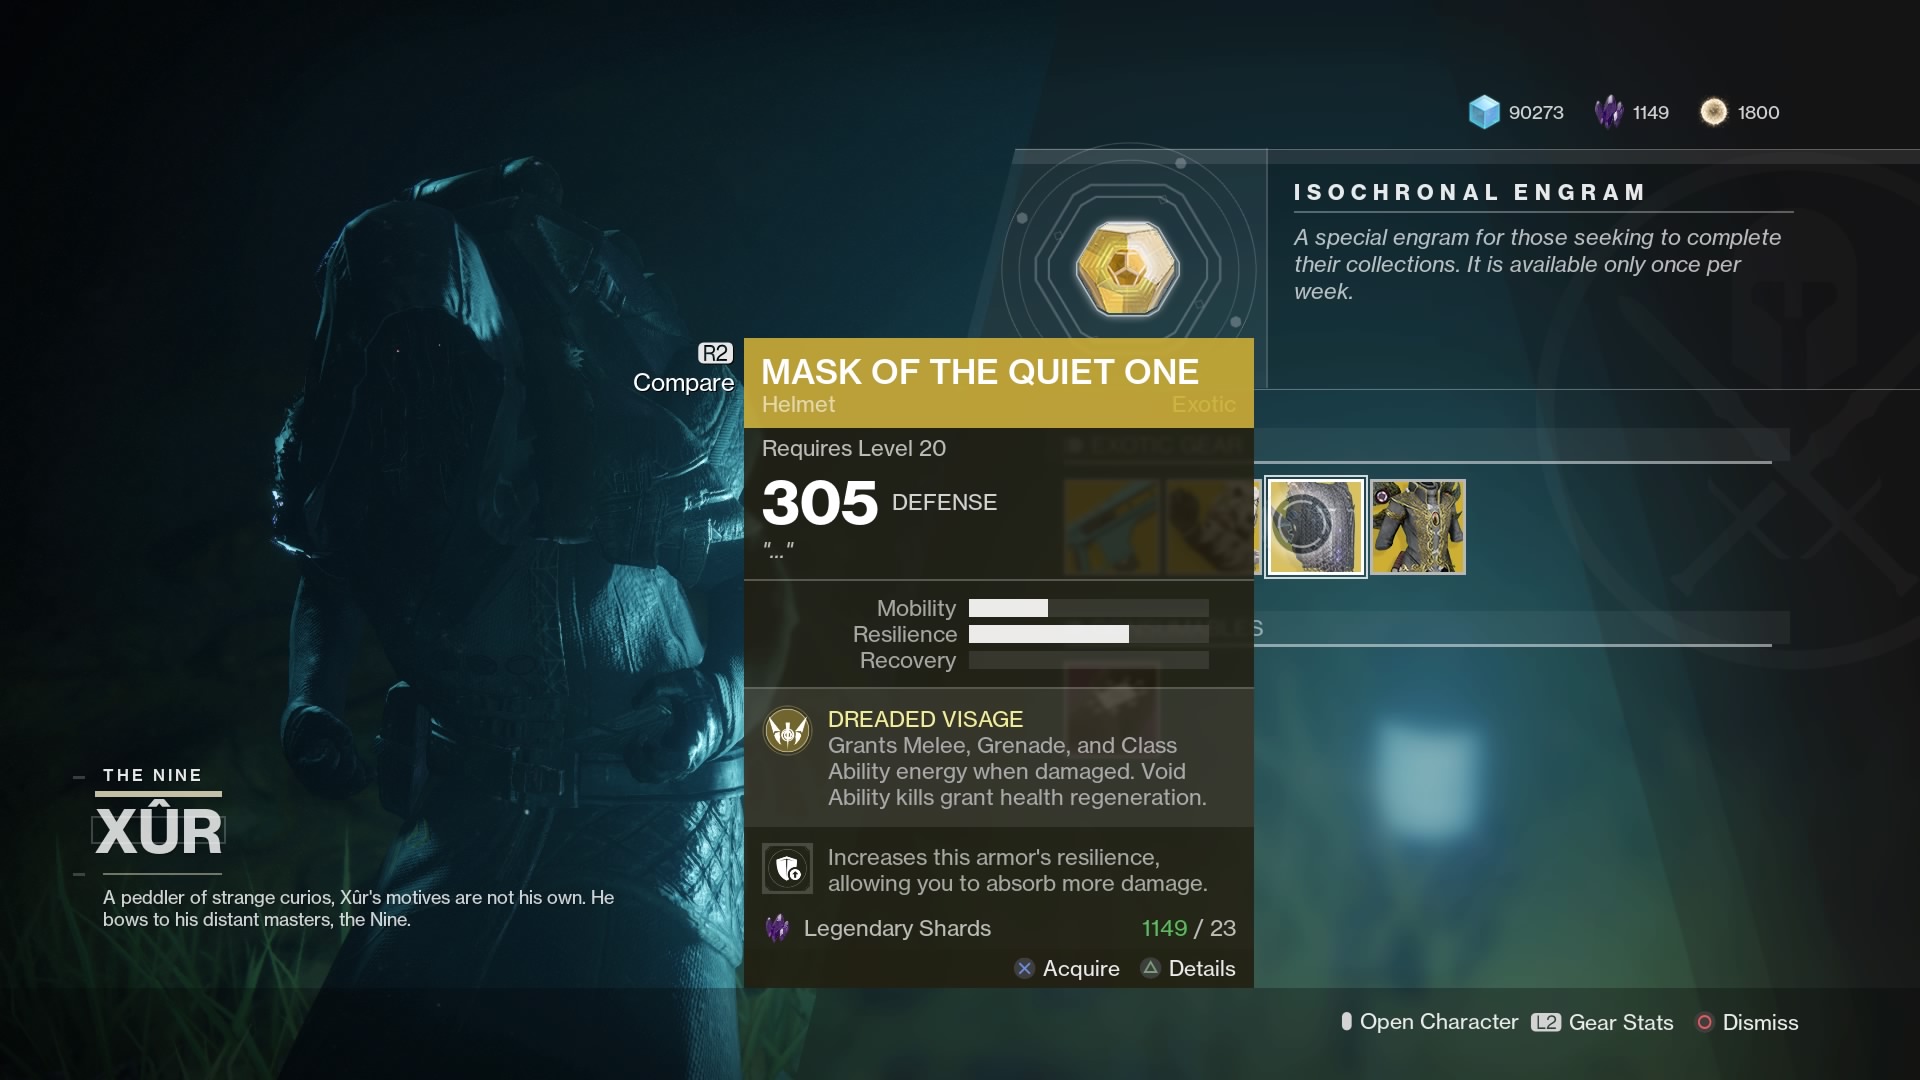 Mask of the Quiet One